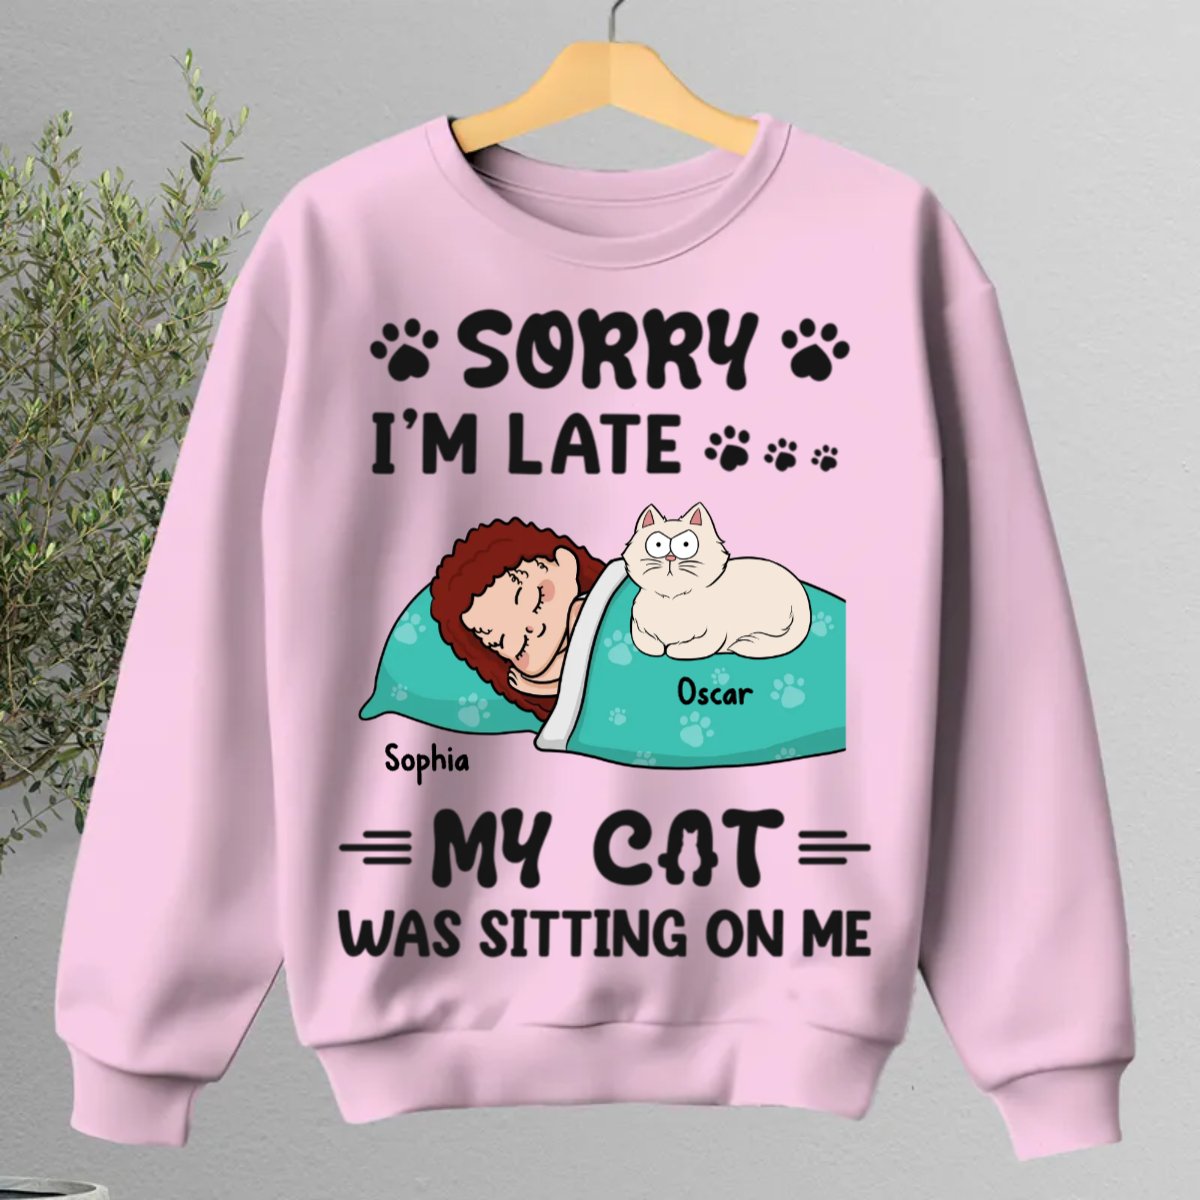 Cat Lovers - Sorry, I'm Late, My Cats Were Sitting On Me - Personalized Unisex T - shirt, Hoodie, Sweatshirt - The Next Custom Gift